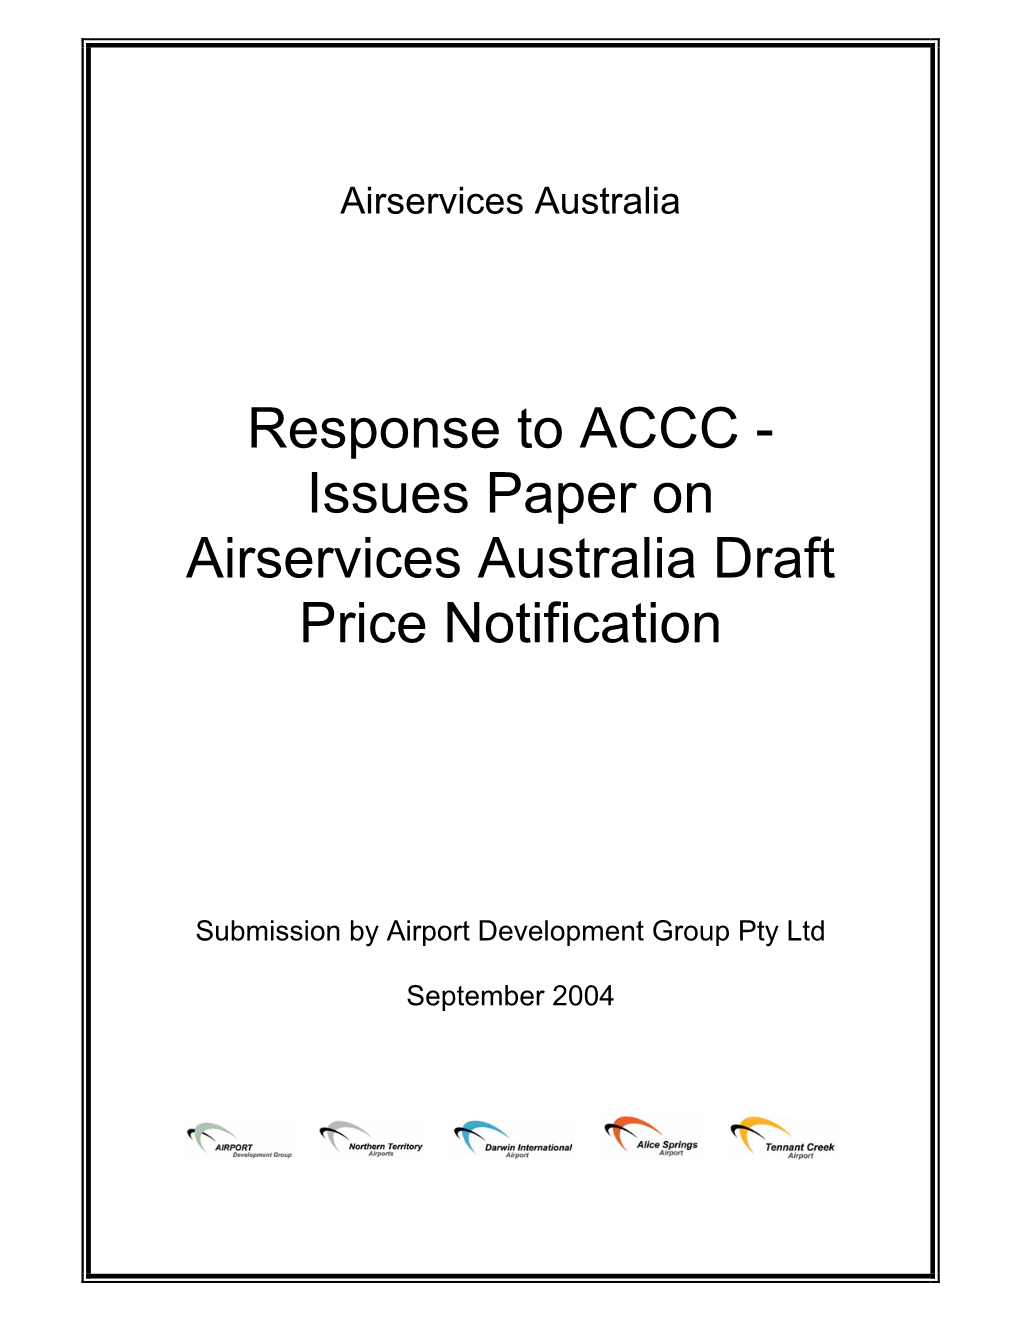 Issues Paper on Airservices Australia Draft Price Notification